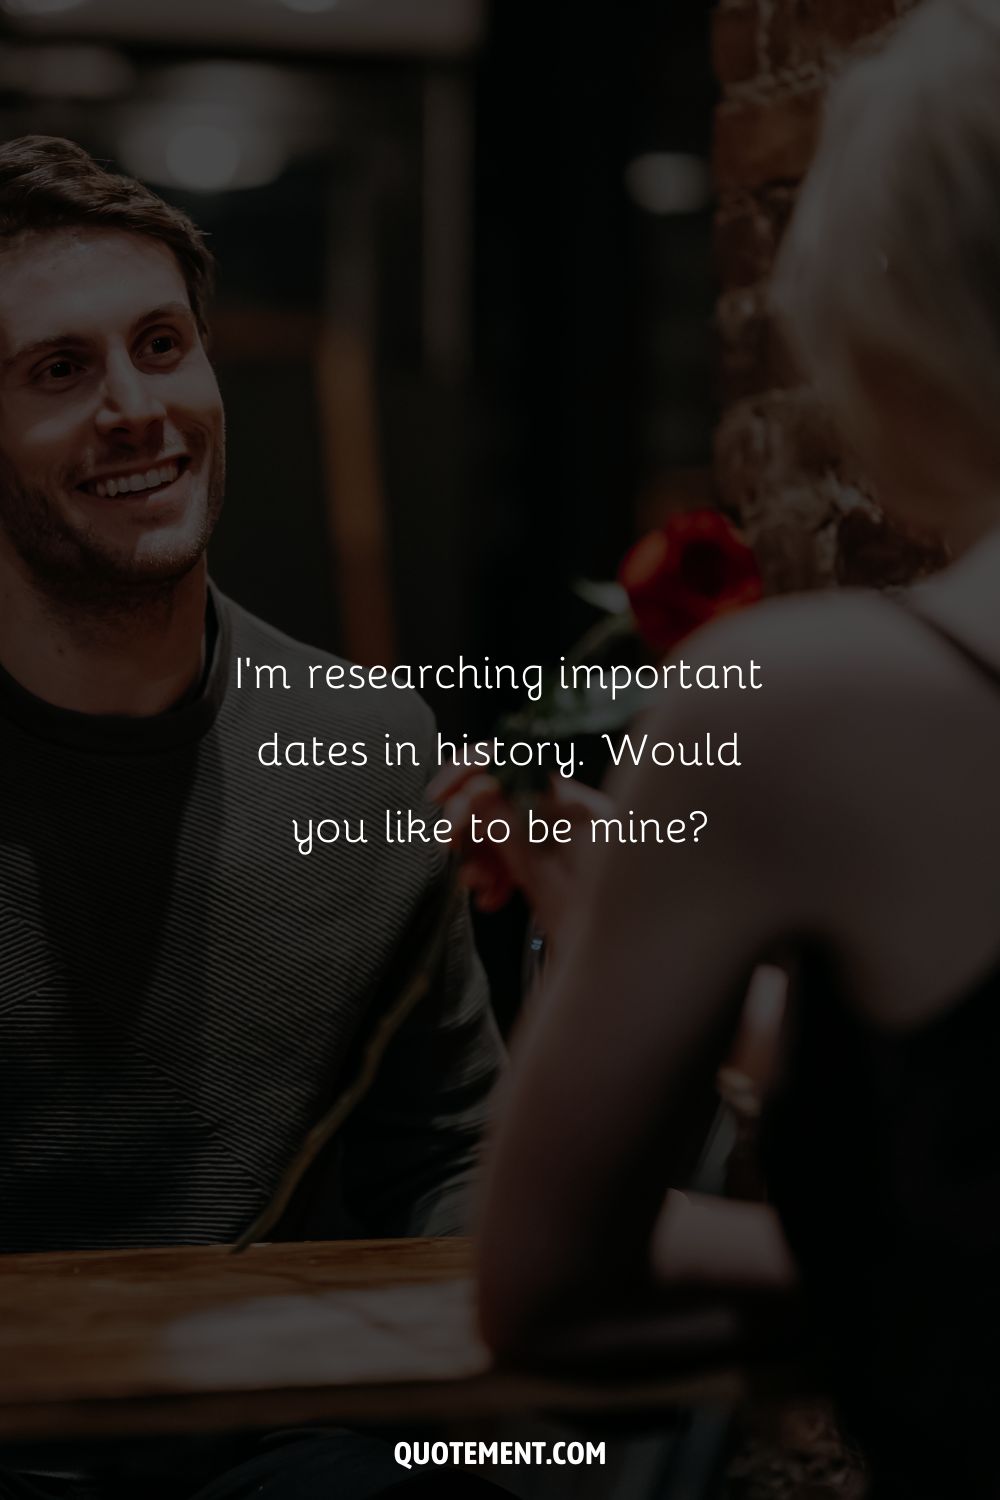 I’m researching important dates in history. Would you like to be mine